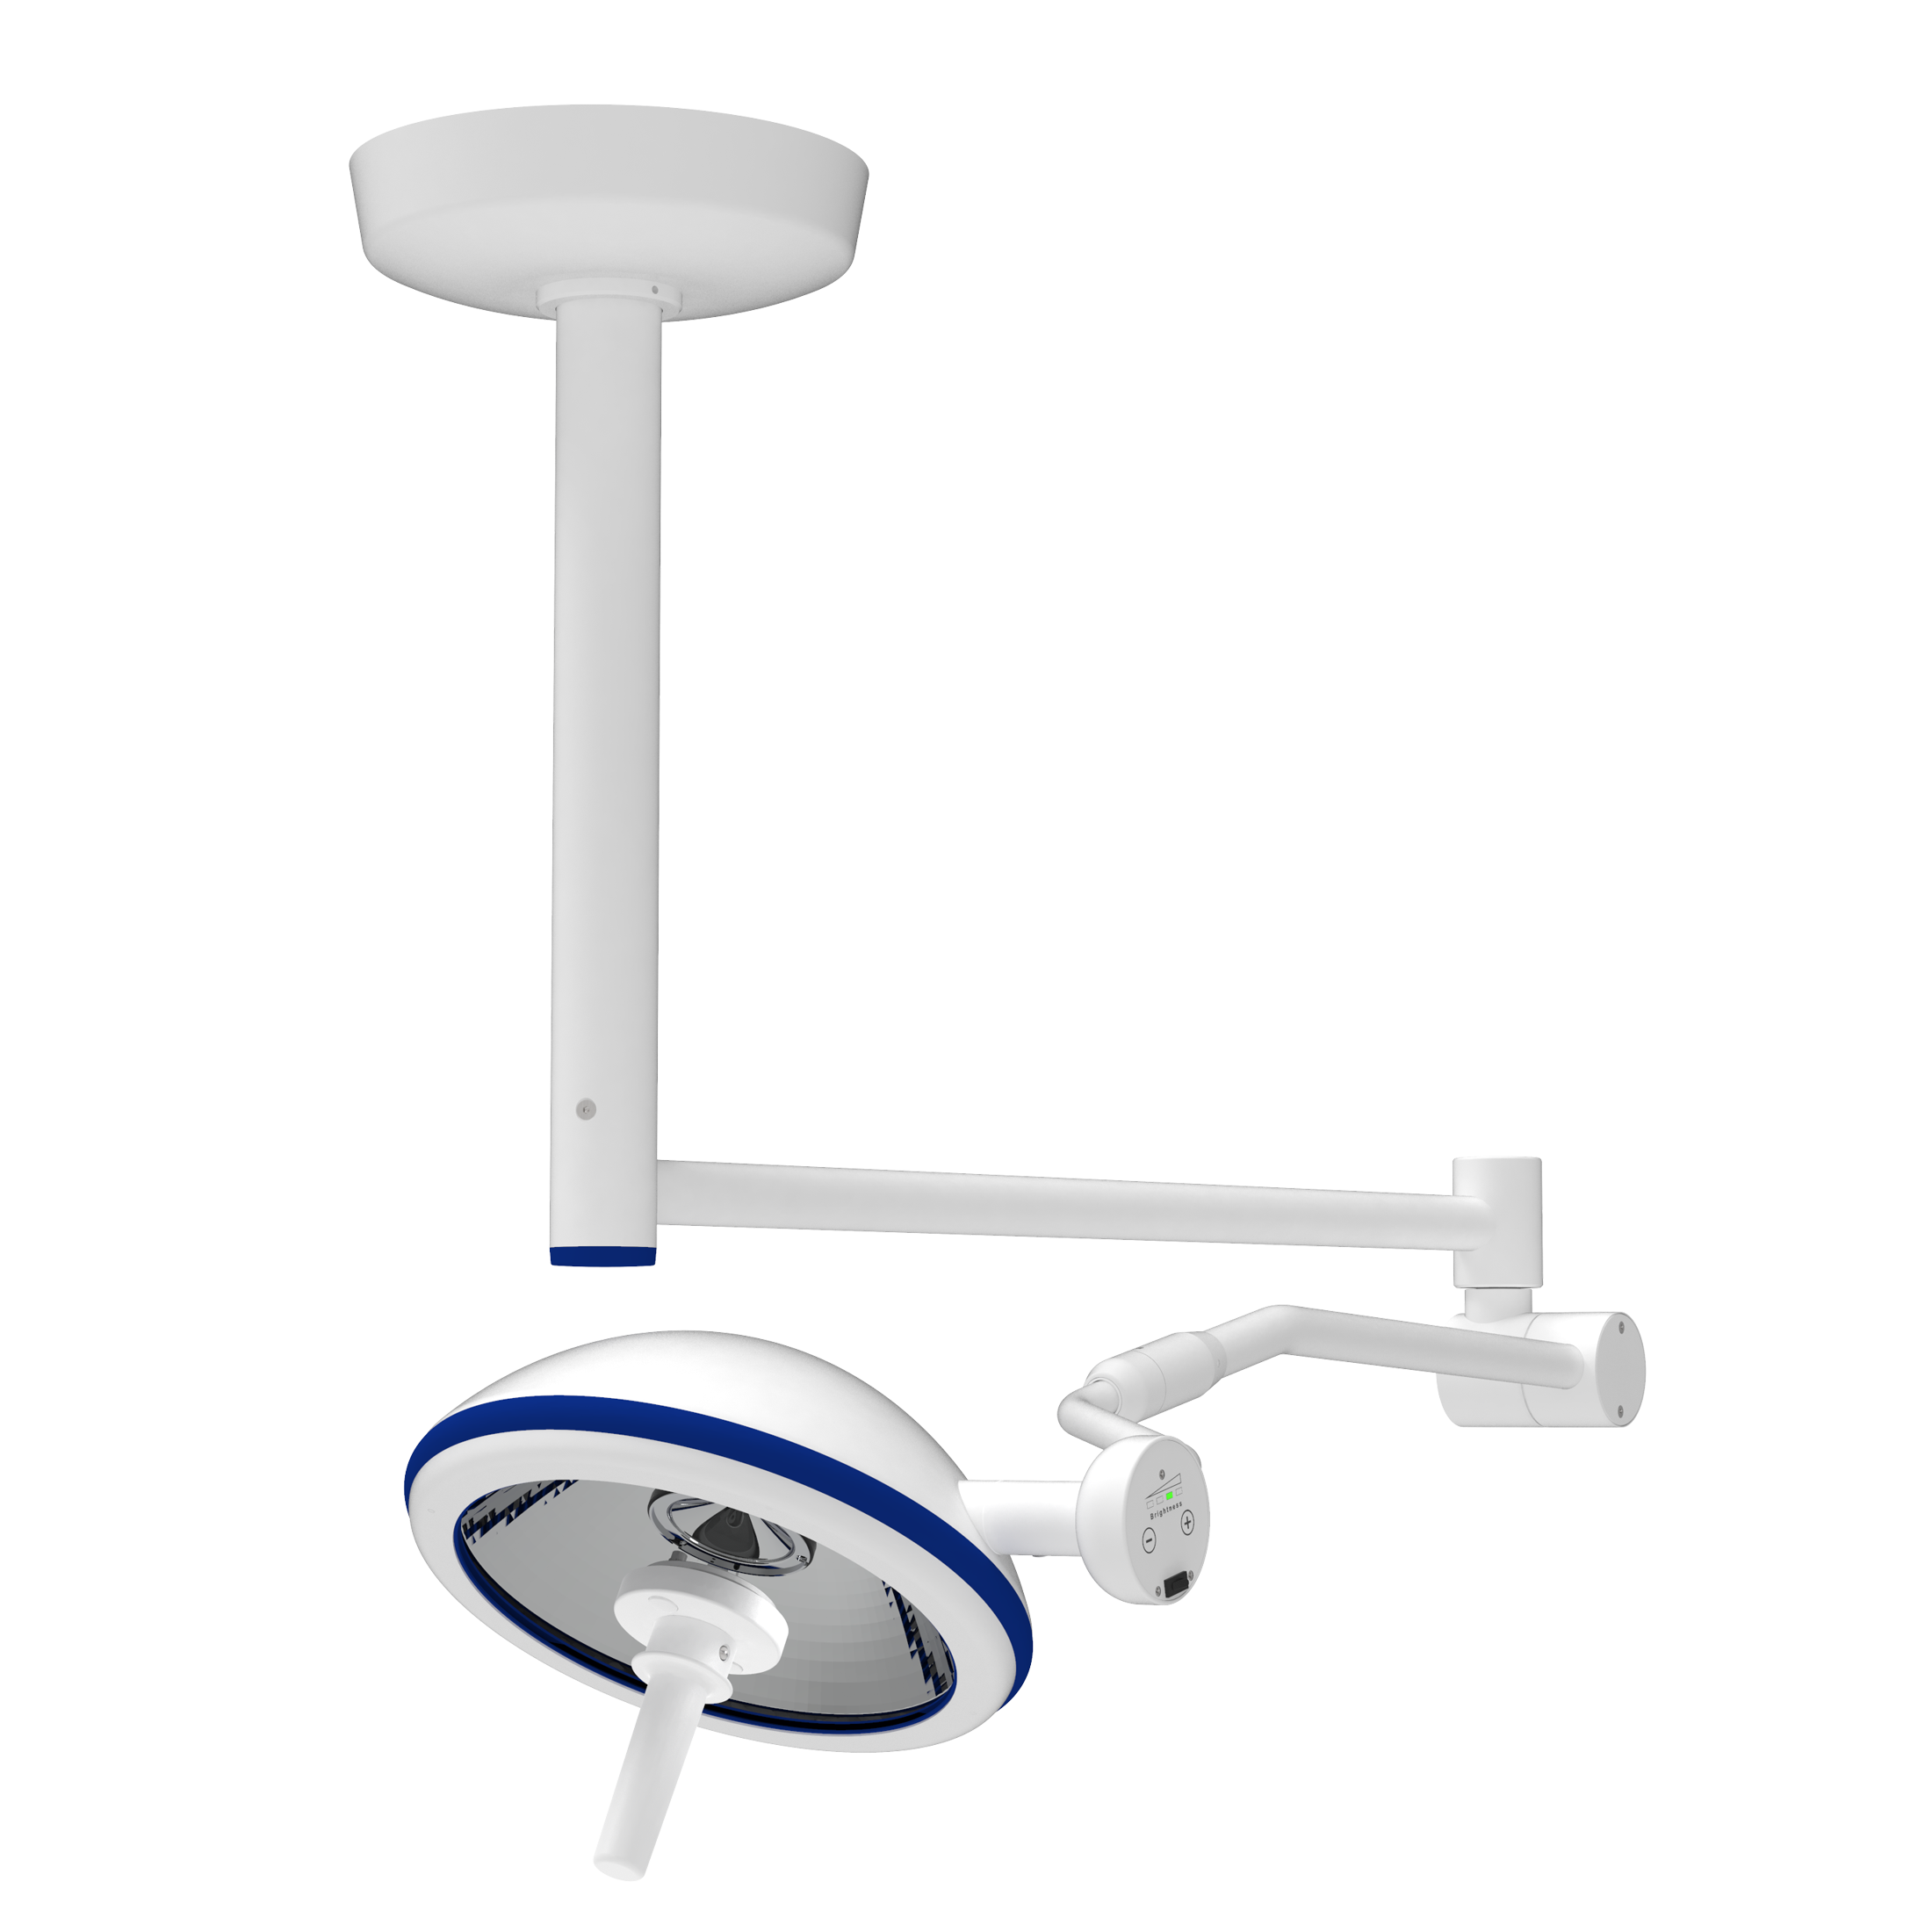 LED ceiling-mounted examination light series 5